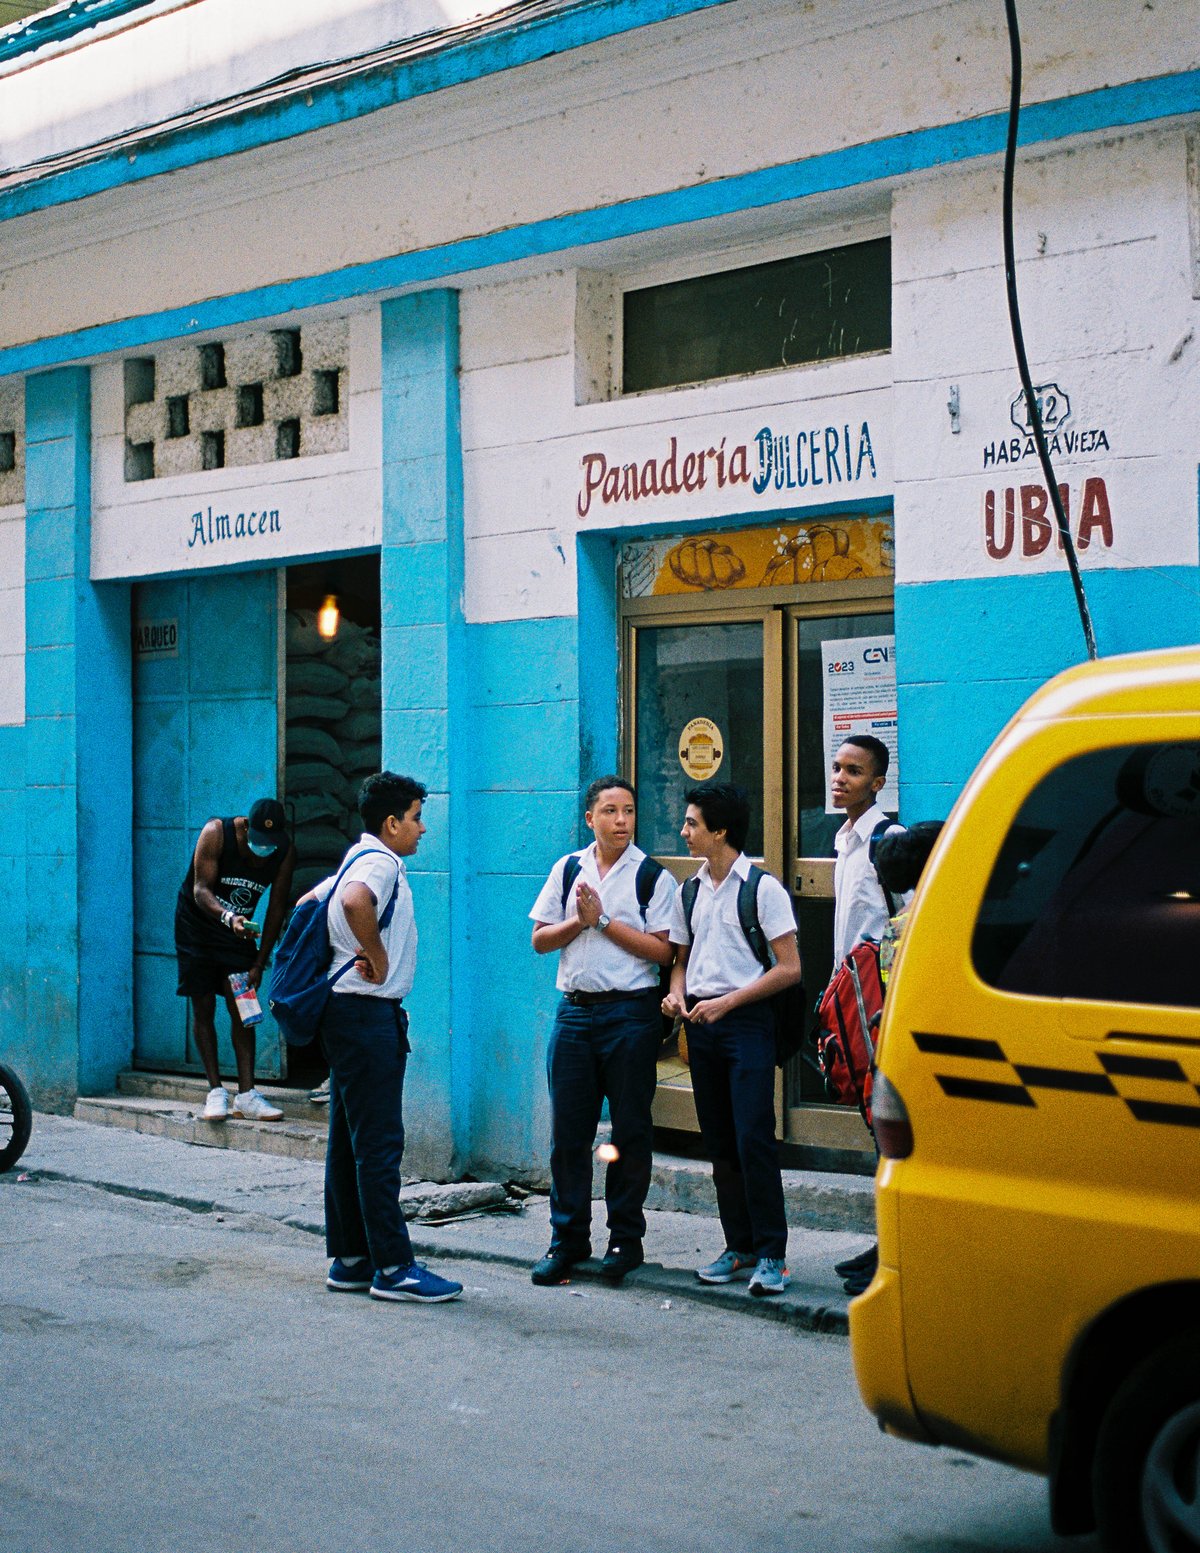 Image of PANADERIA STOP